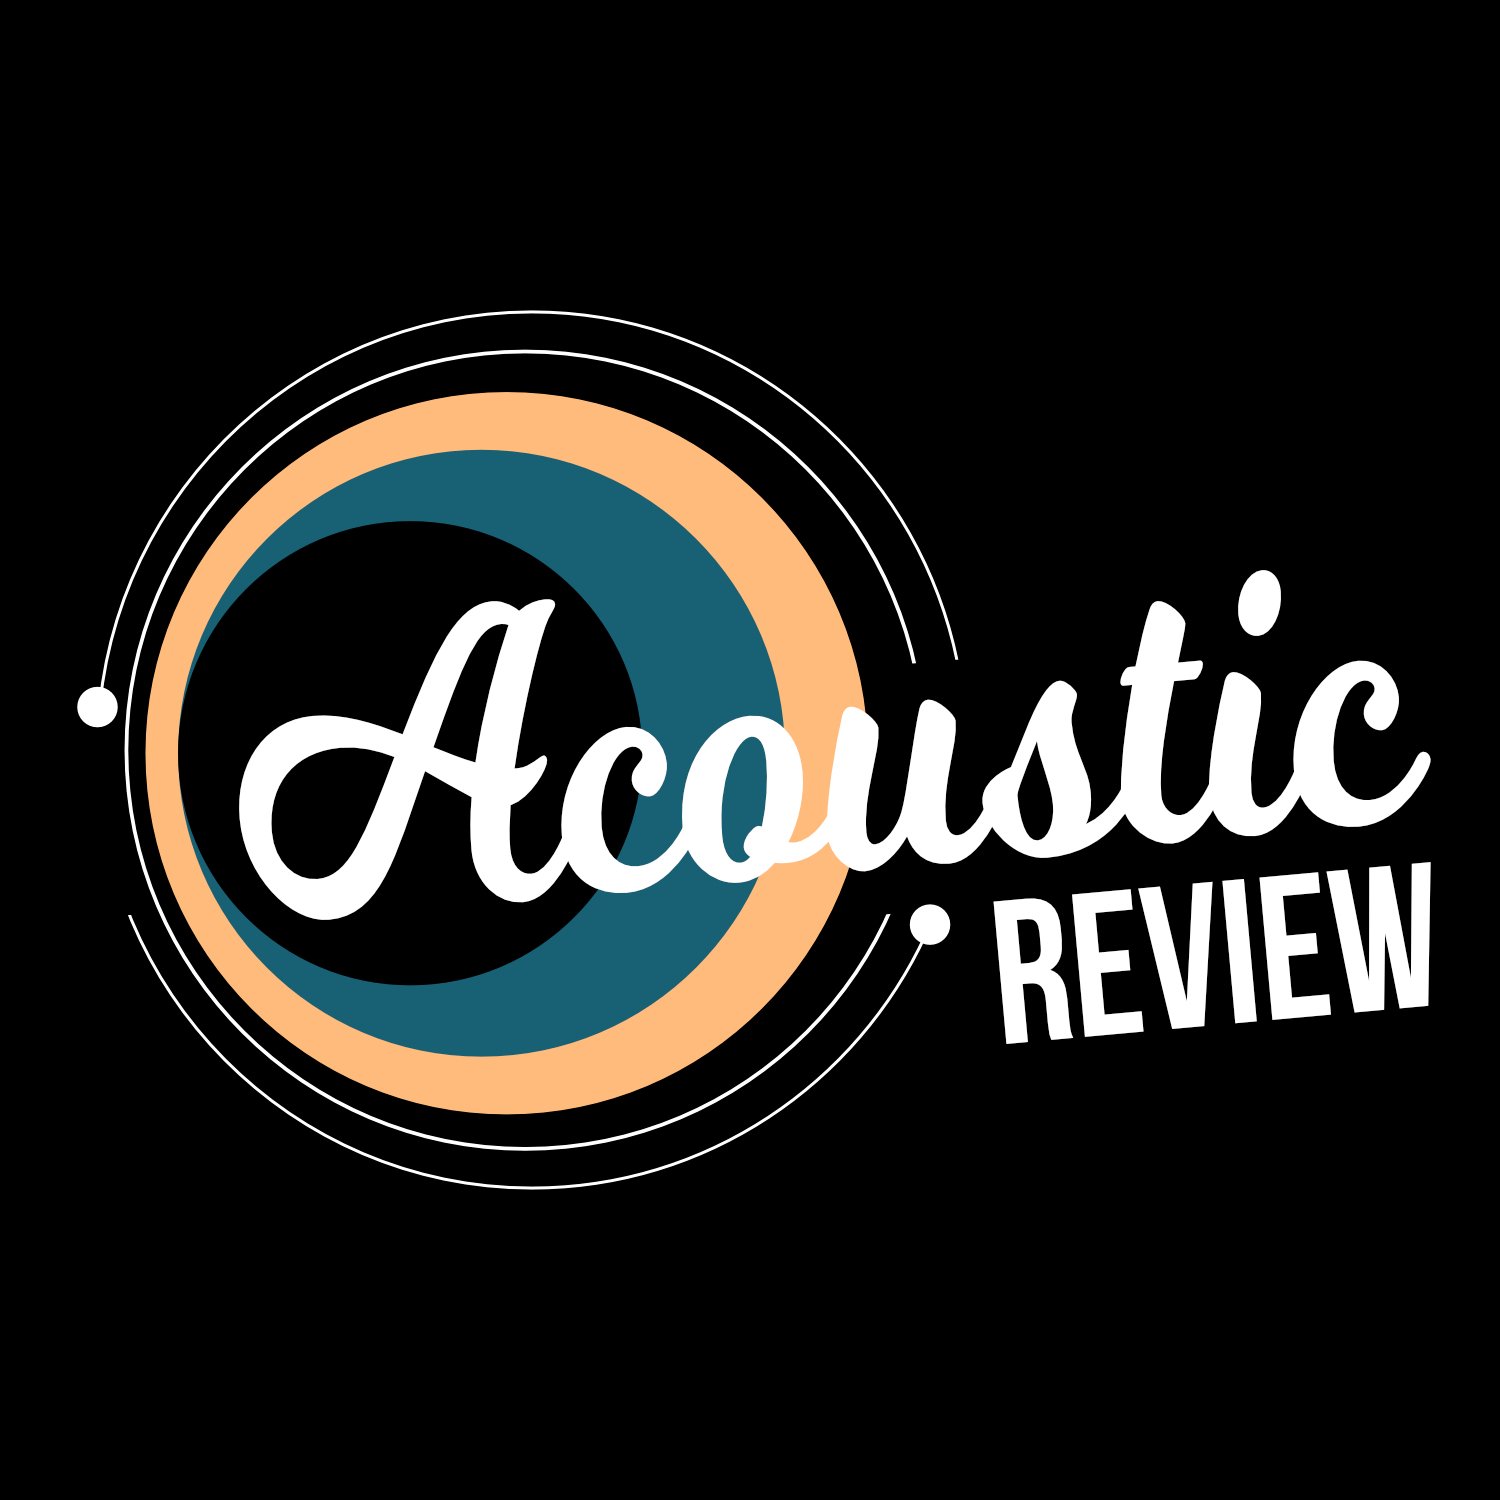 Acoustic Review is the home of honest and impartial acoustic guitar reviews, along with all things acoustic news and music related.